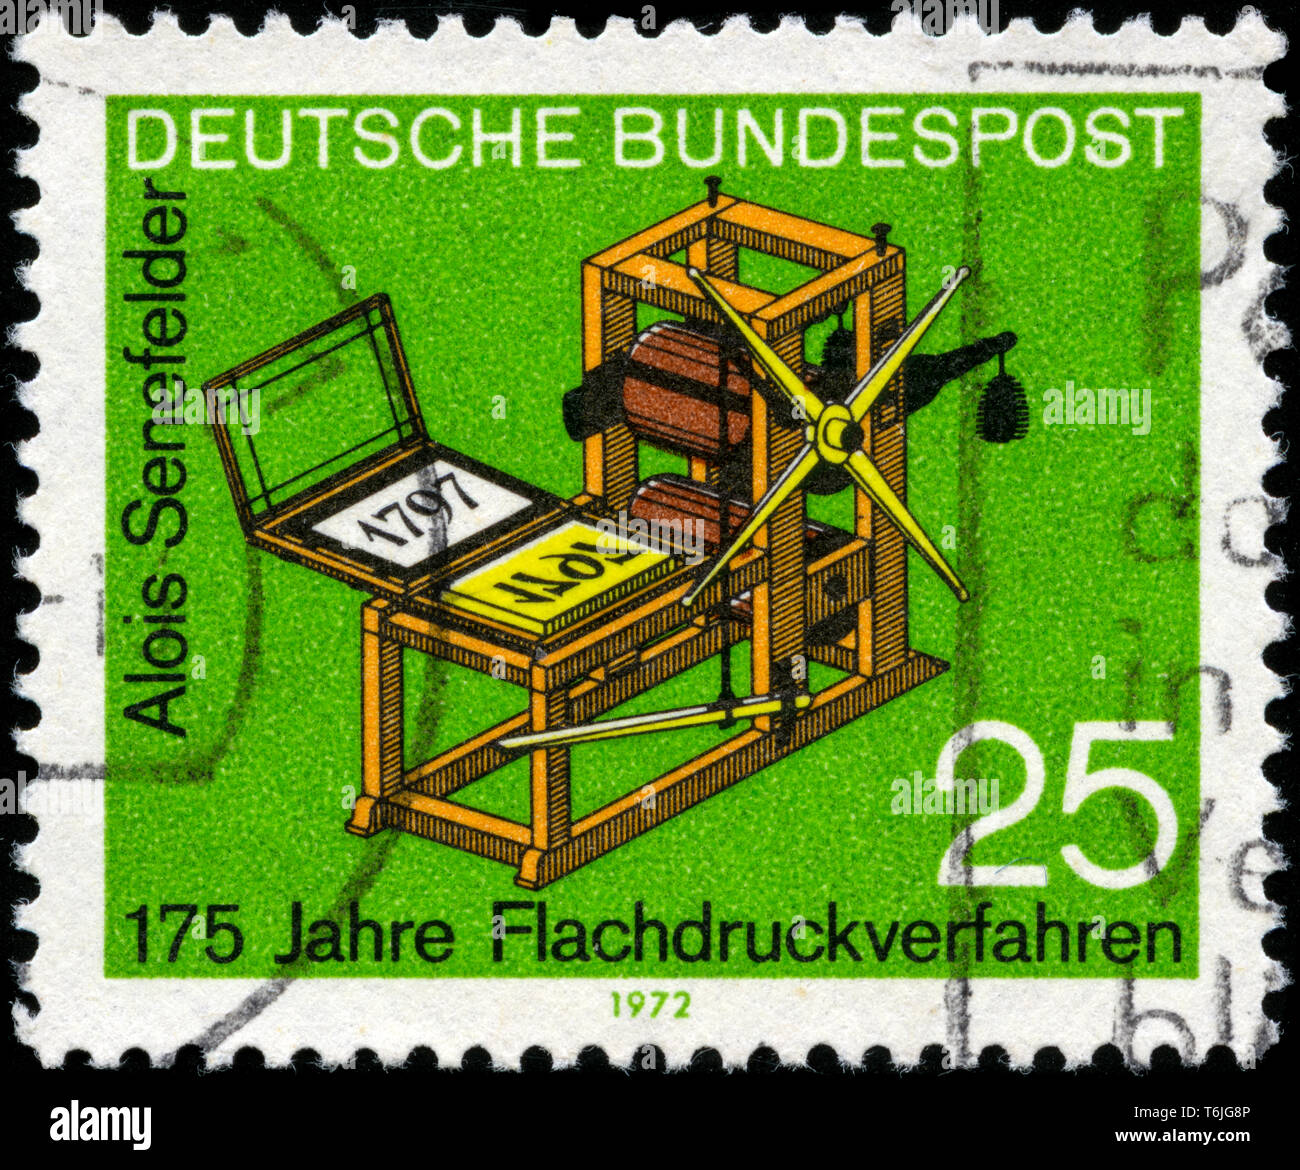 Postage stamp from the Federal Republic of Germany in the 175 Years of Offset Lithography series issued in 1972 Stock Photo